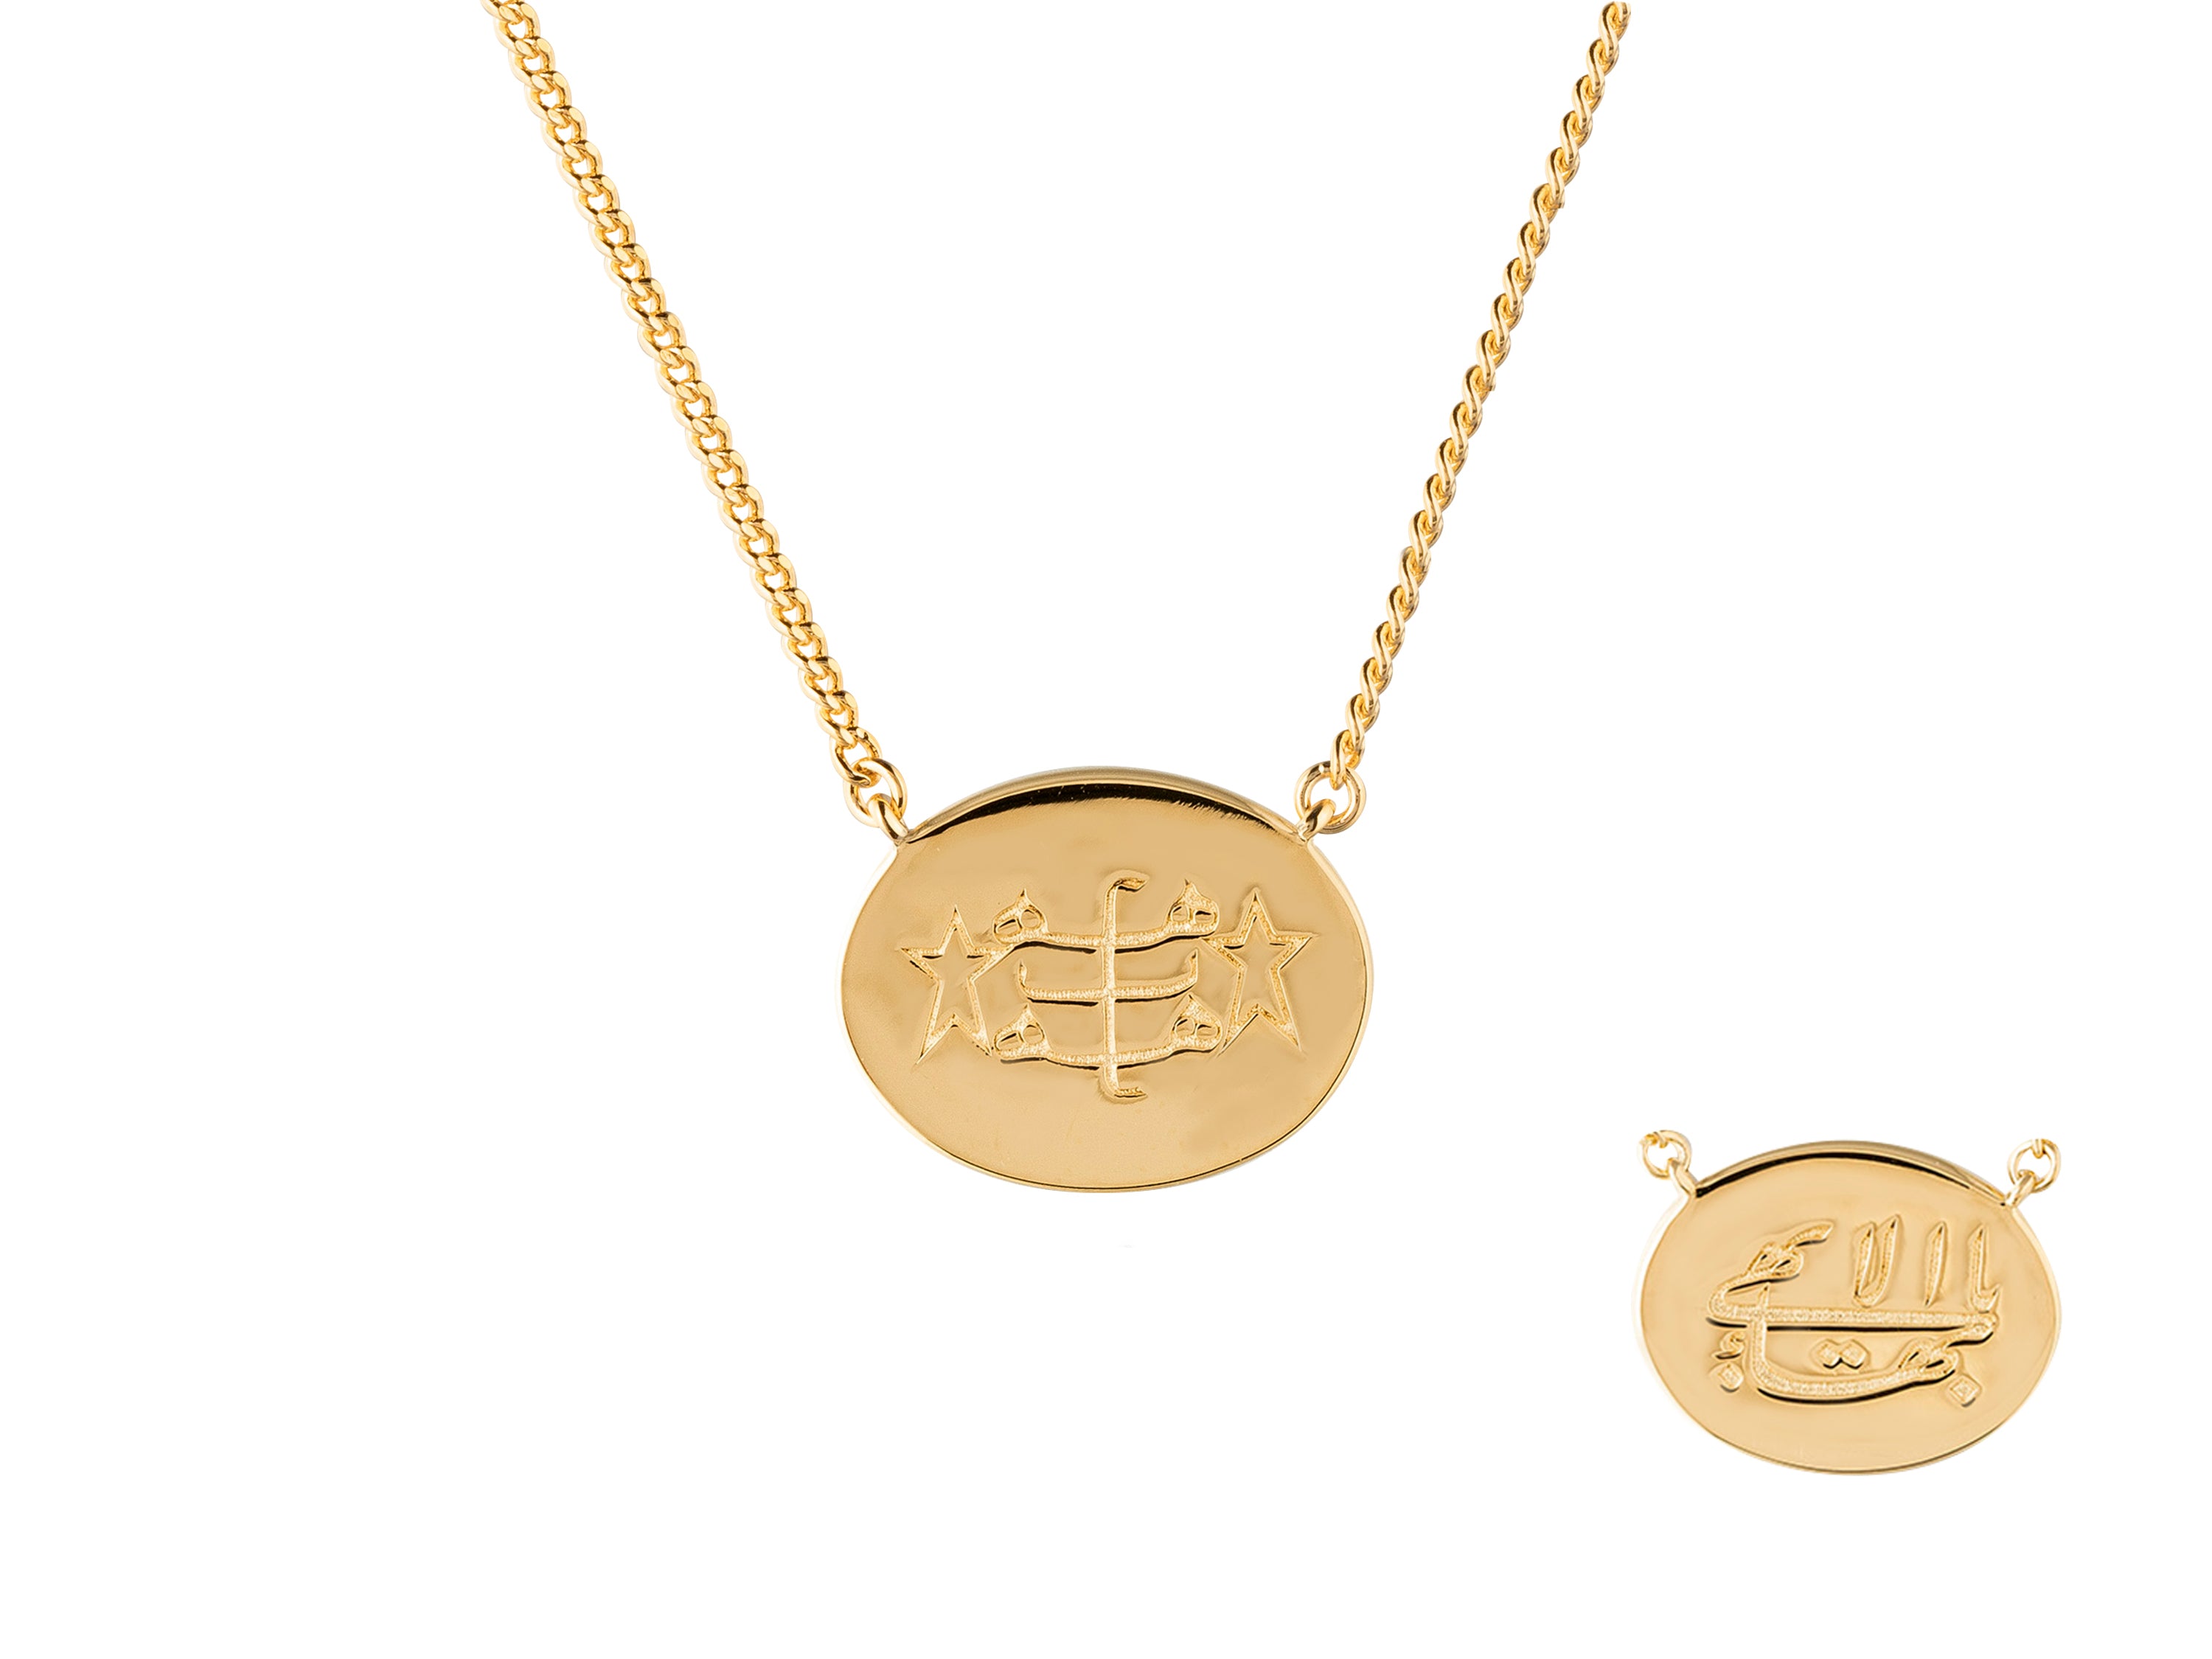 minimalist modern gold oval Bahai pendant necklace with Greatest Name in Arabic and ringstone symbol